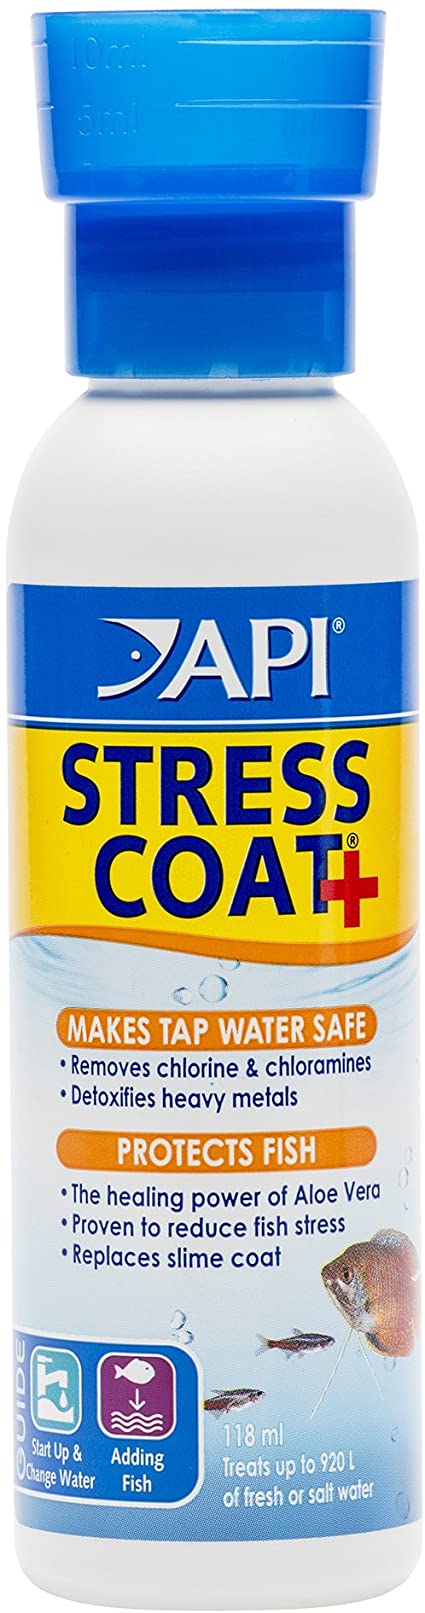 API Stress Coat Water Conditioner, Makes tap Water Safe, Replaces fish's Protective Coat Damaged by handling or Fish Fighting, Use When Adding or Changing Water, Adding Fish and When Fish are Injured